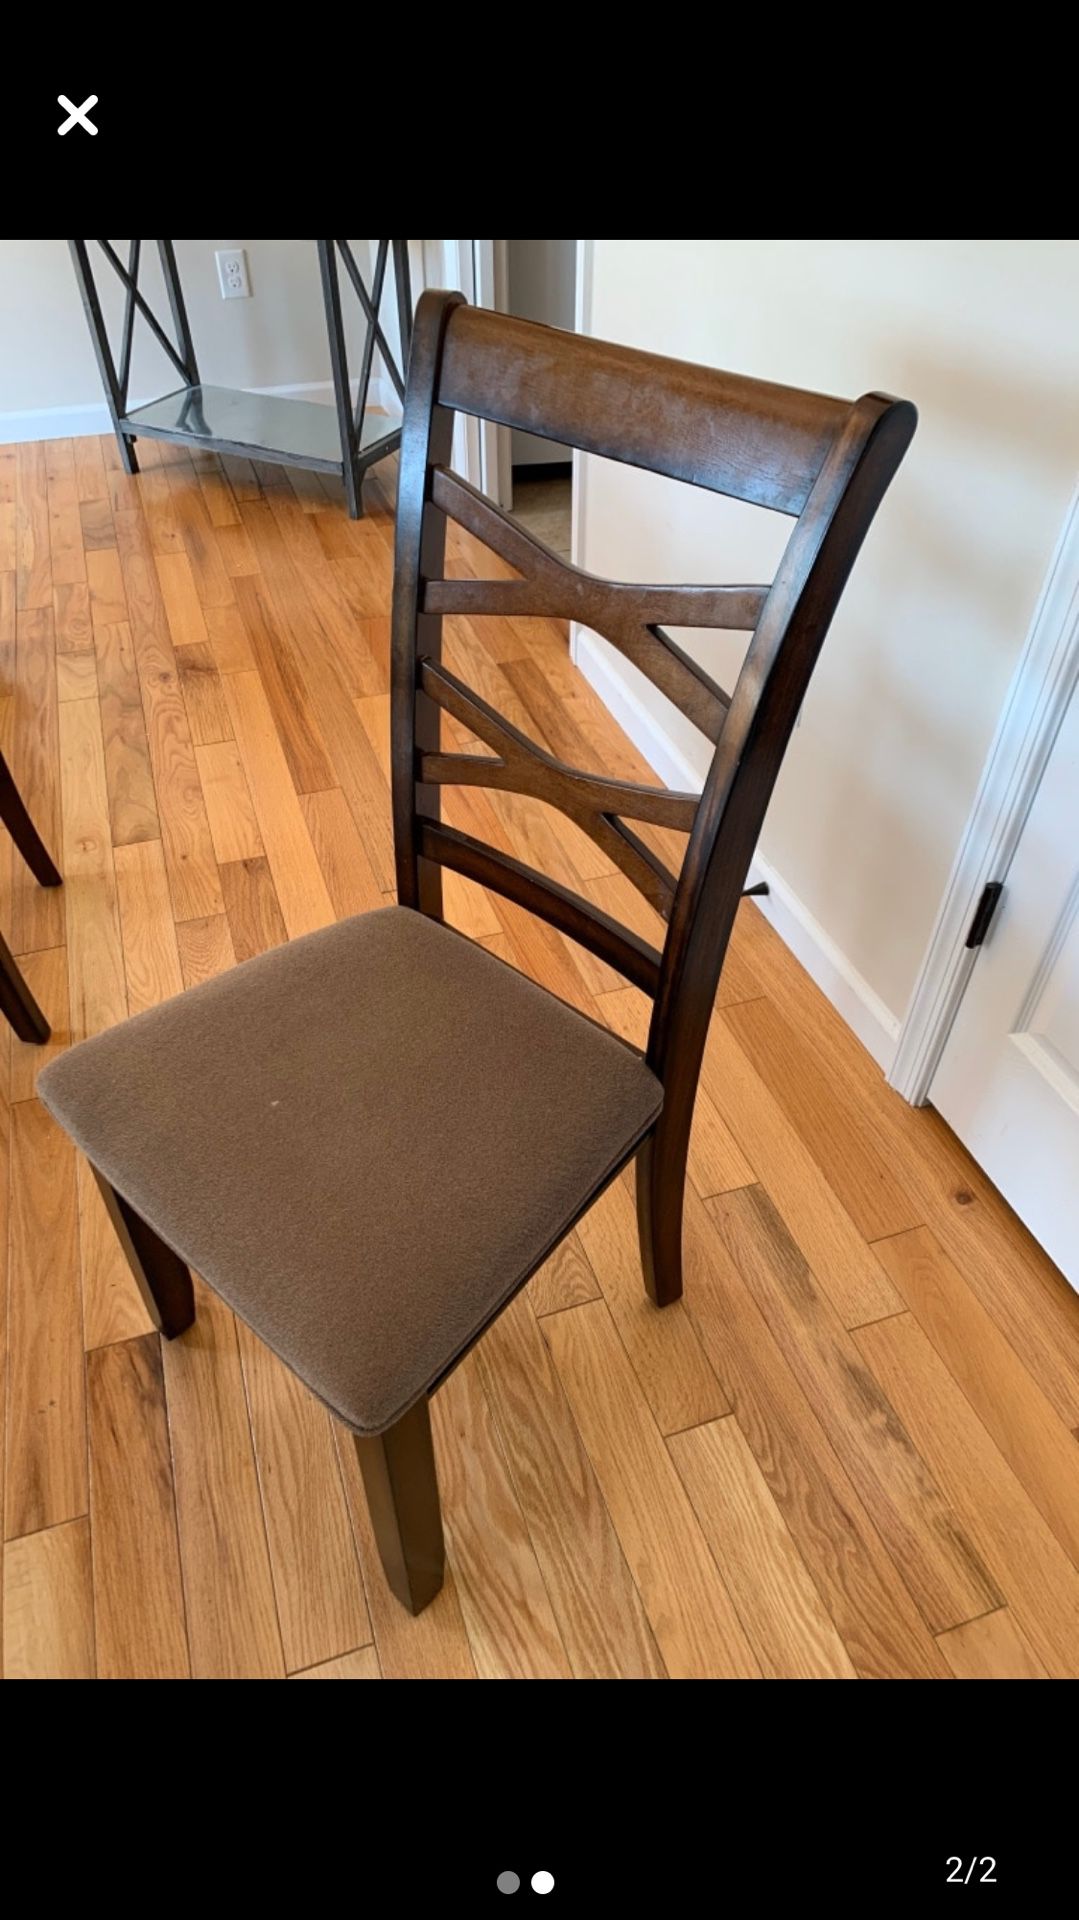 Kitchen table with 5 chairs